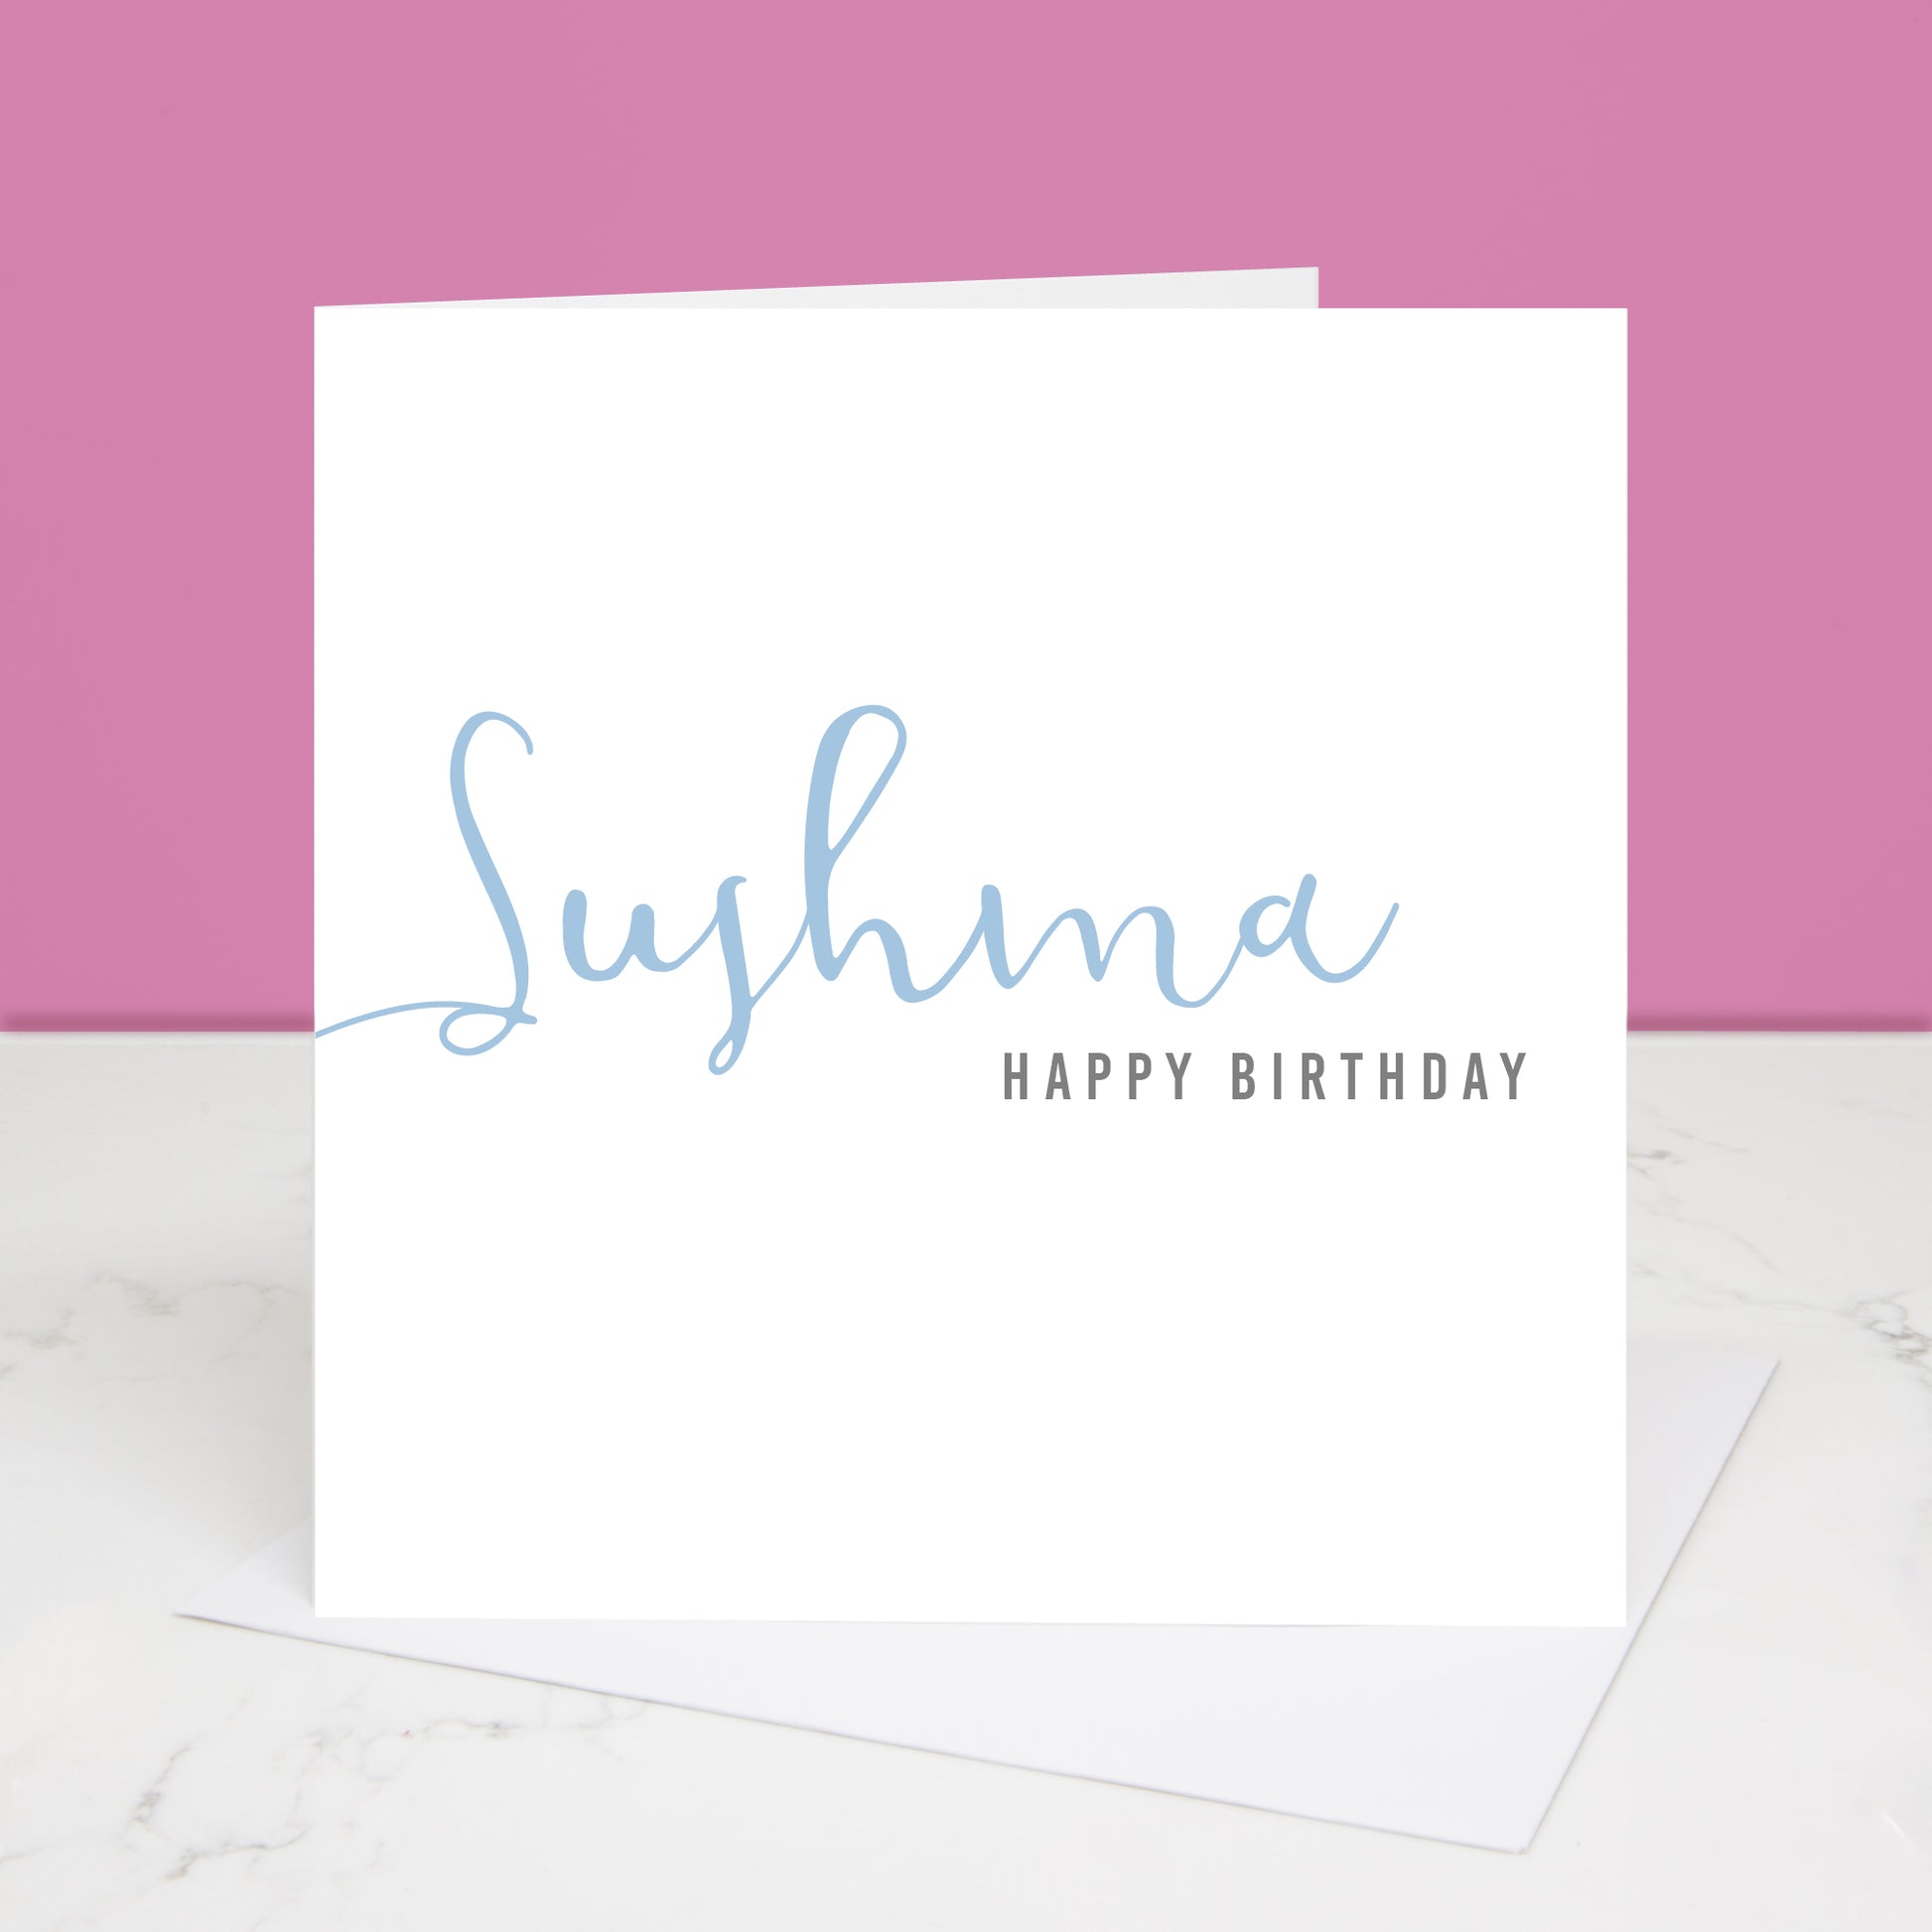 Happy Birthday card with their name in a calligraphy font All images and designs © Slice of Pie Designs 